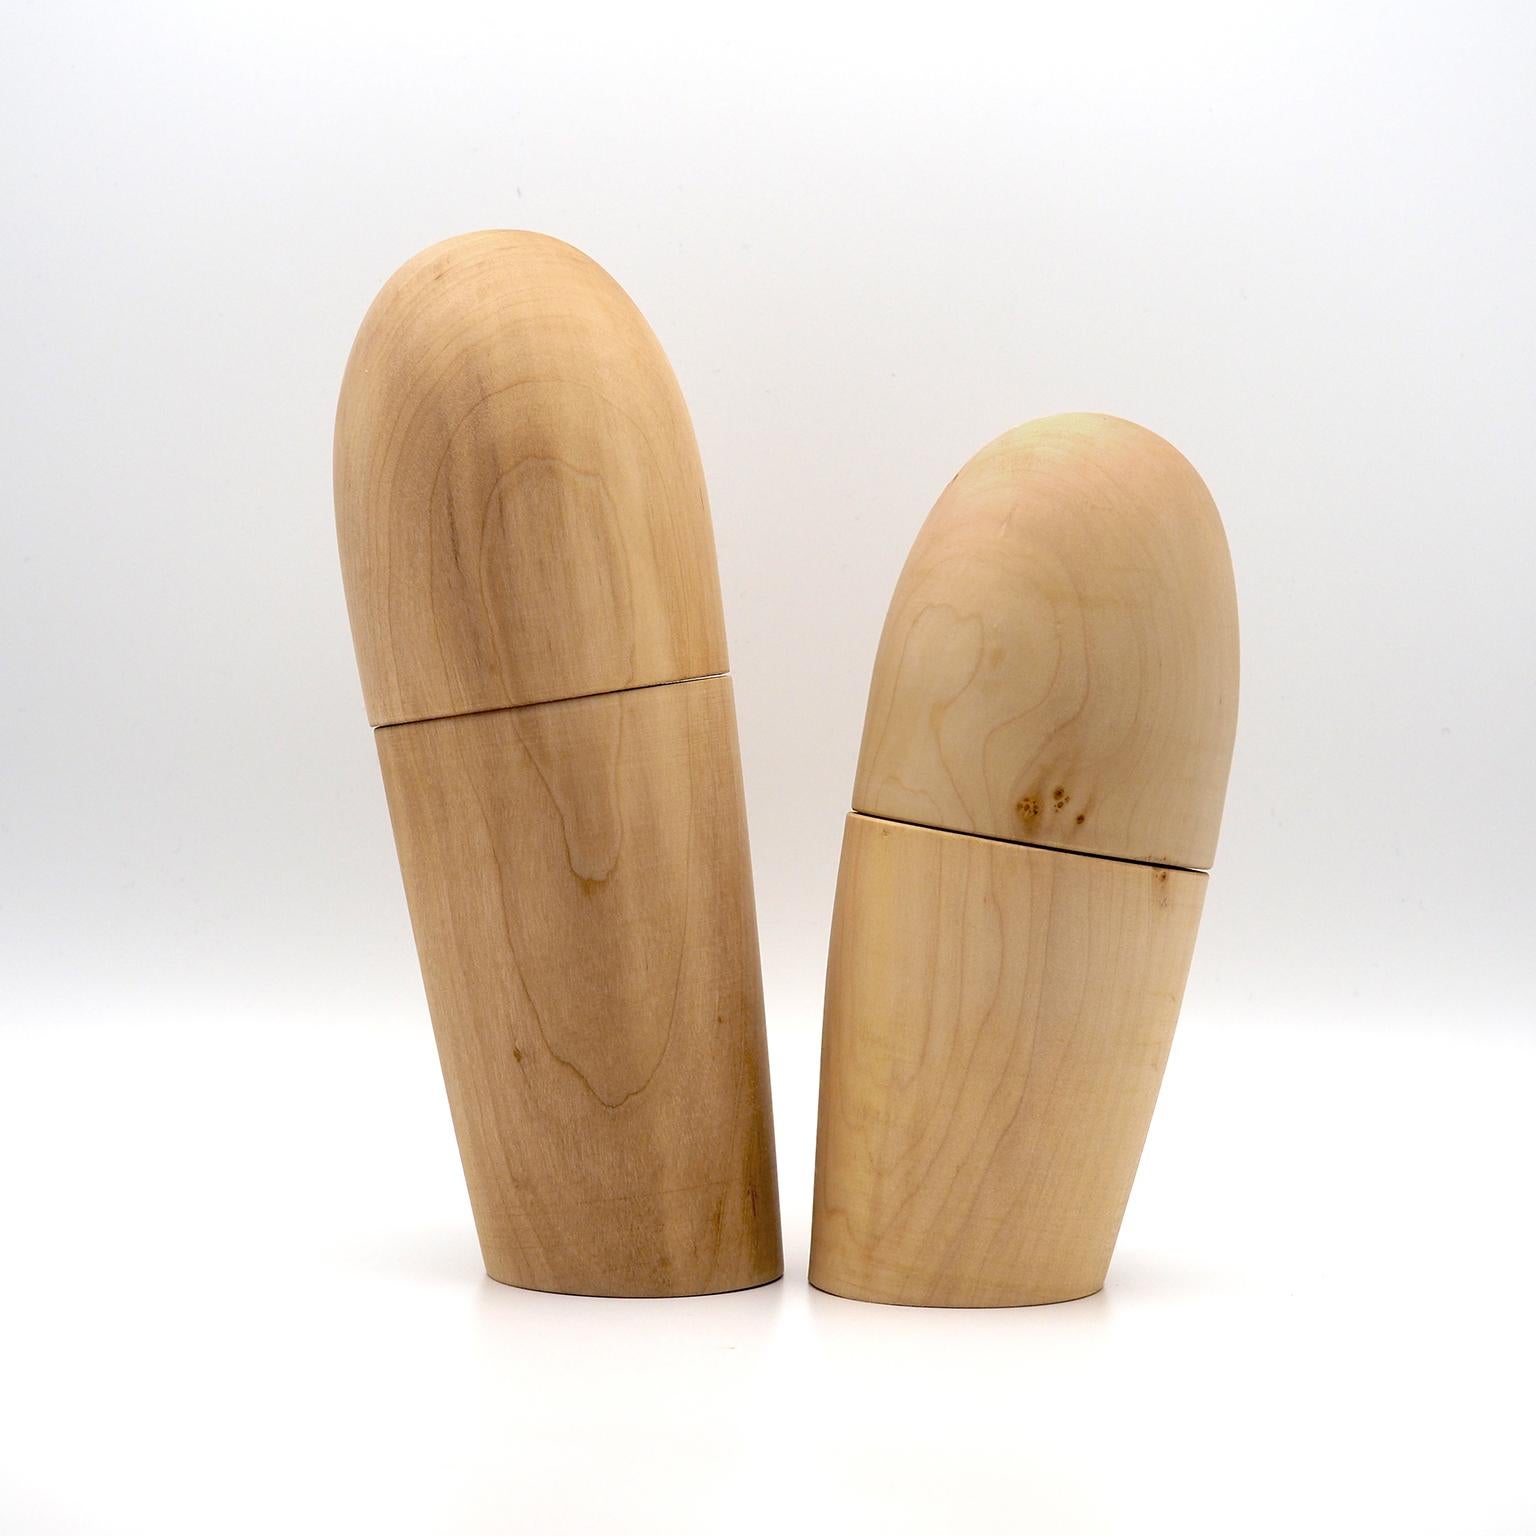 Unusual pair of salt and pepper mills.
They are handcrafted in maple wood, the internal mechanism is in high-resistance ceramic.
 